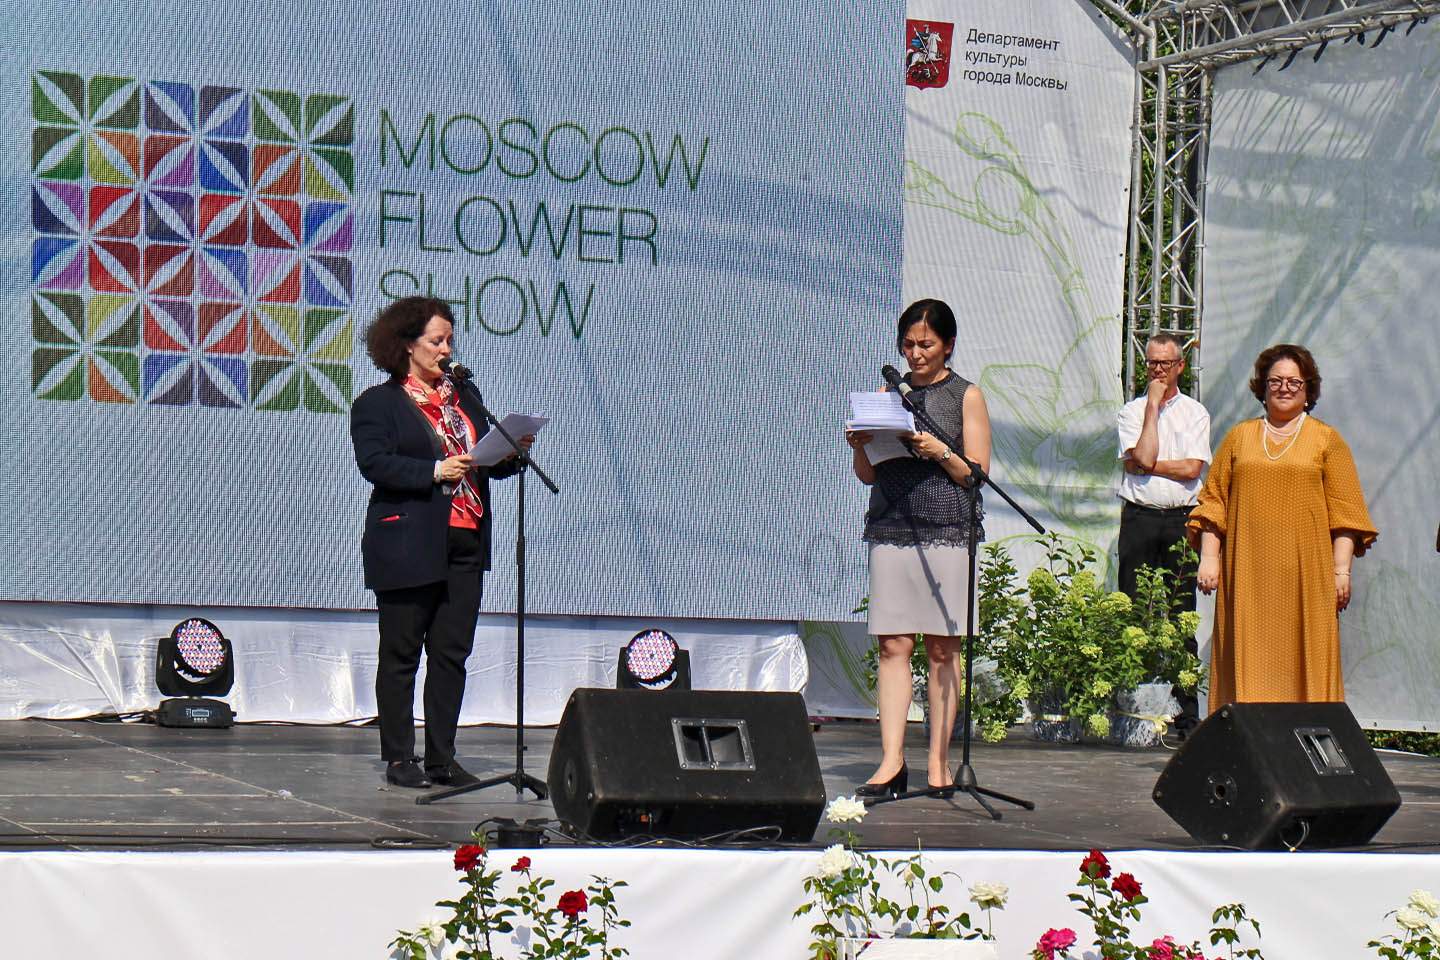 Moscow Flower Show 2018